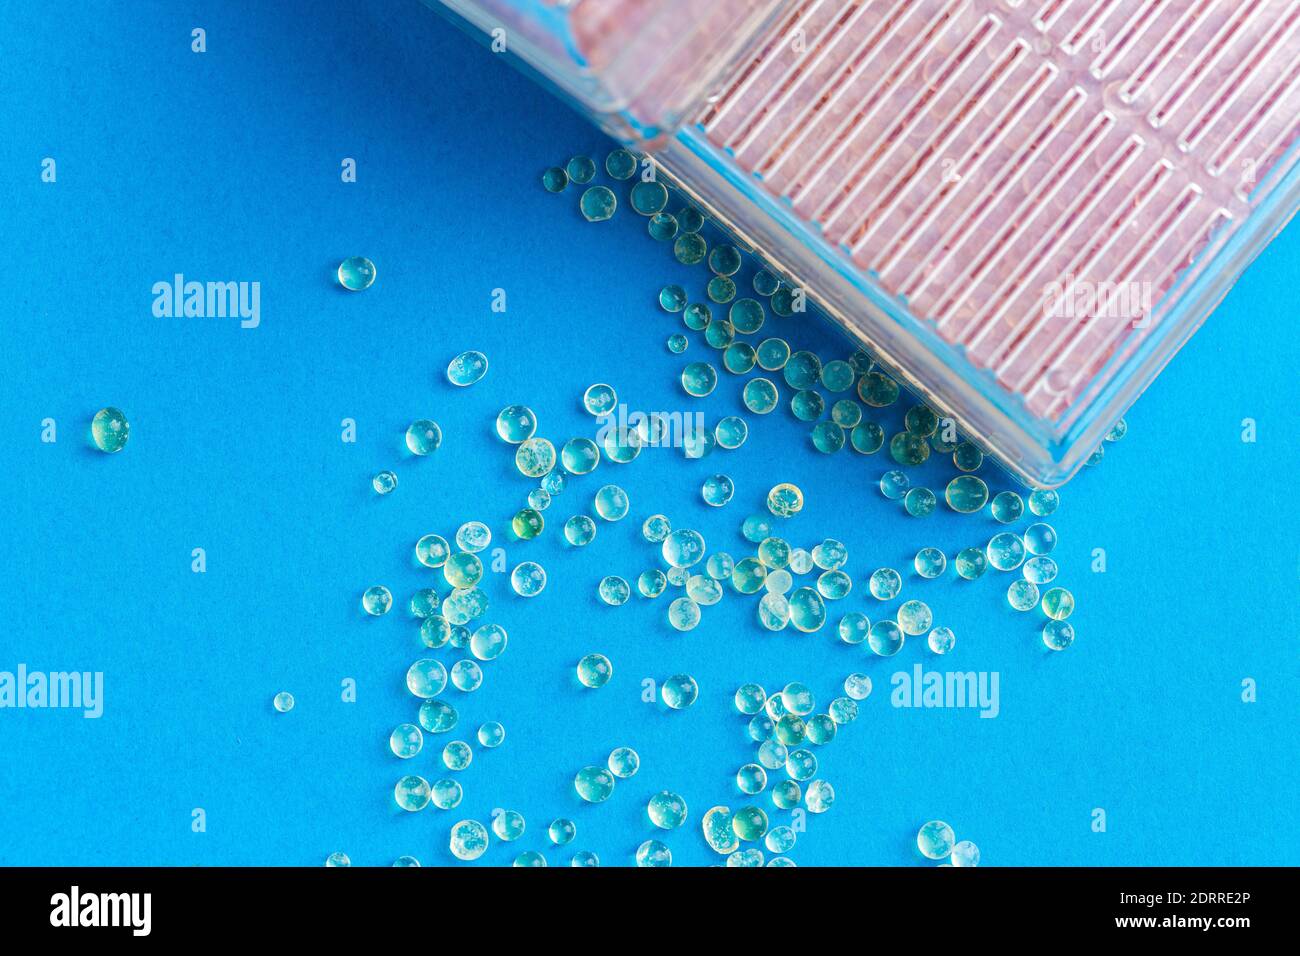 Boxes with silica gel absorbs moisture on blue background Stock Photo